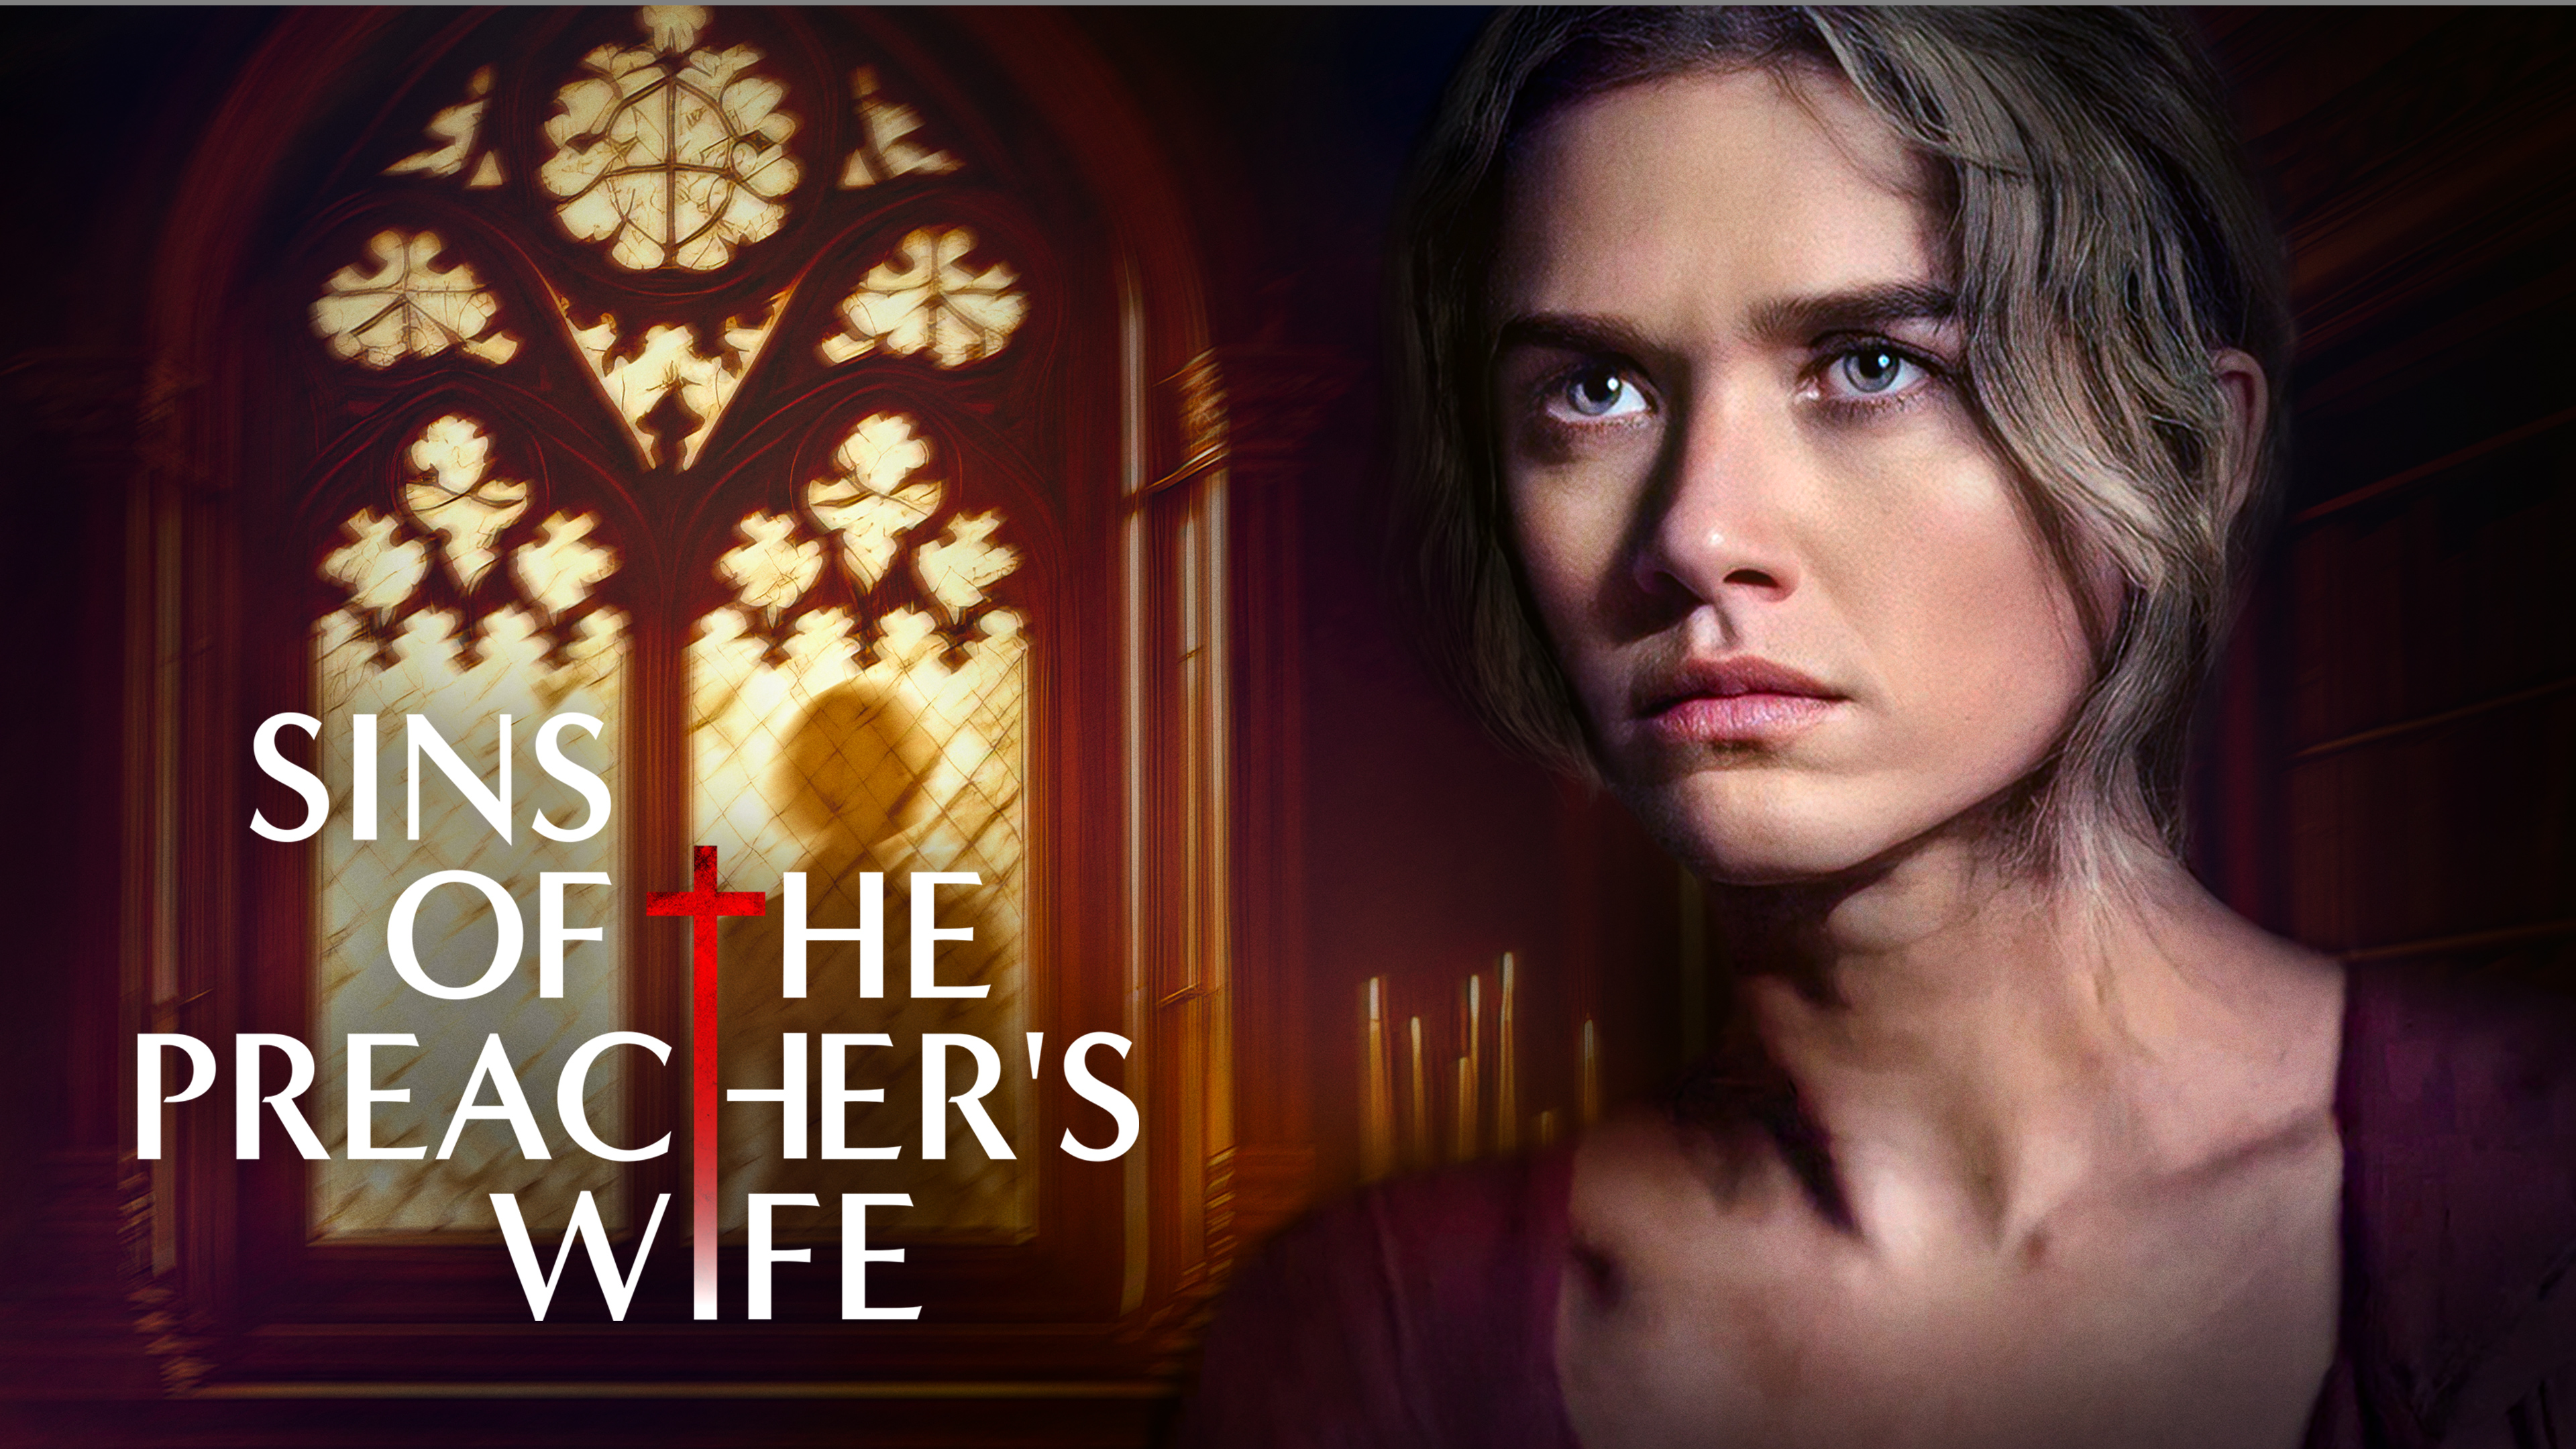 Sins of the Preachers Wife